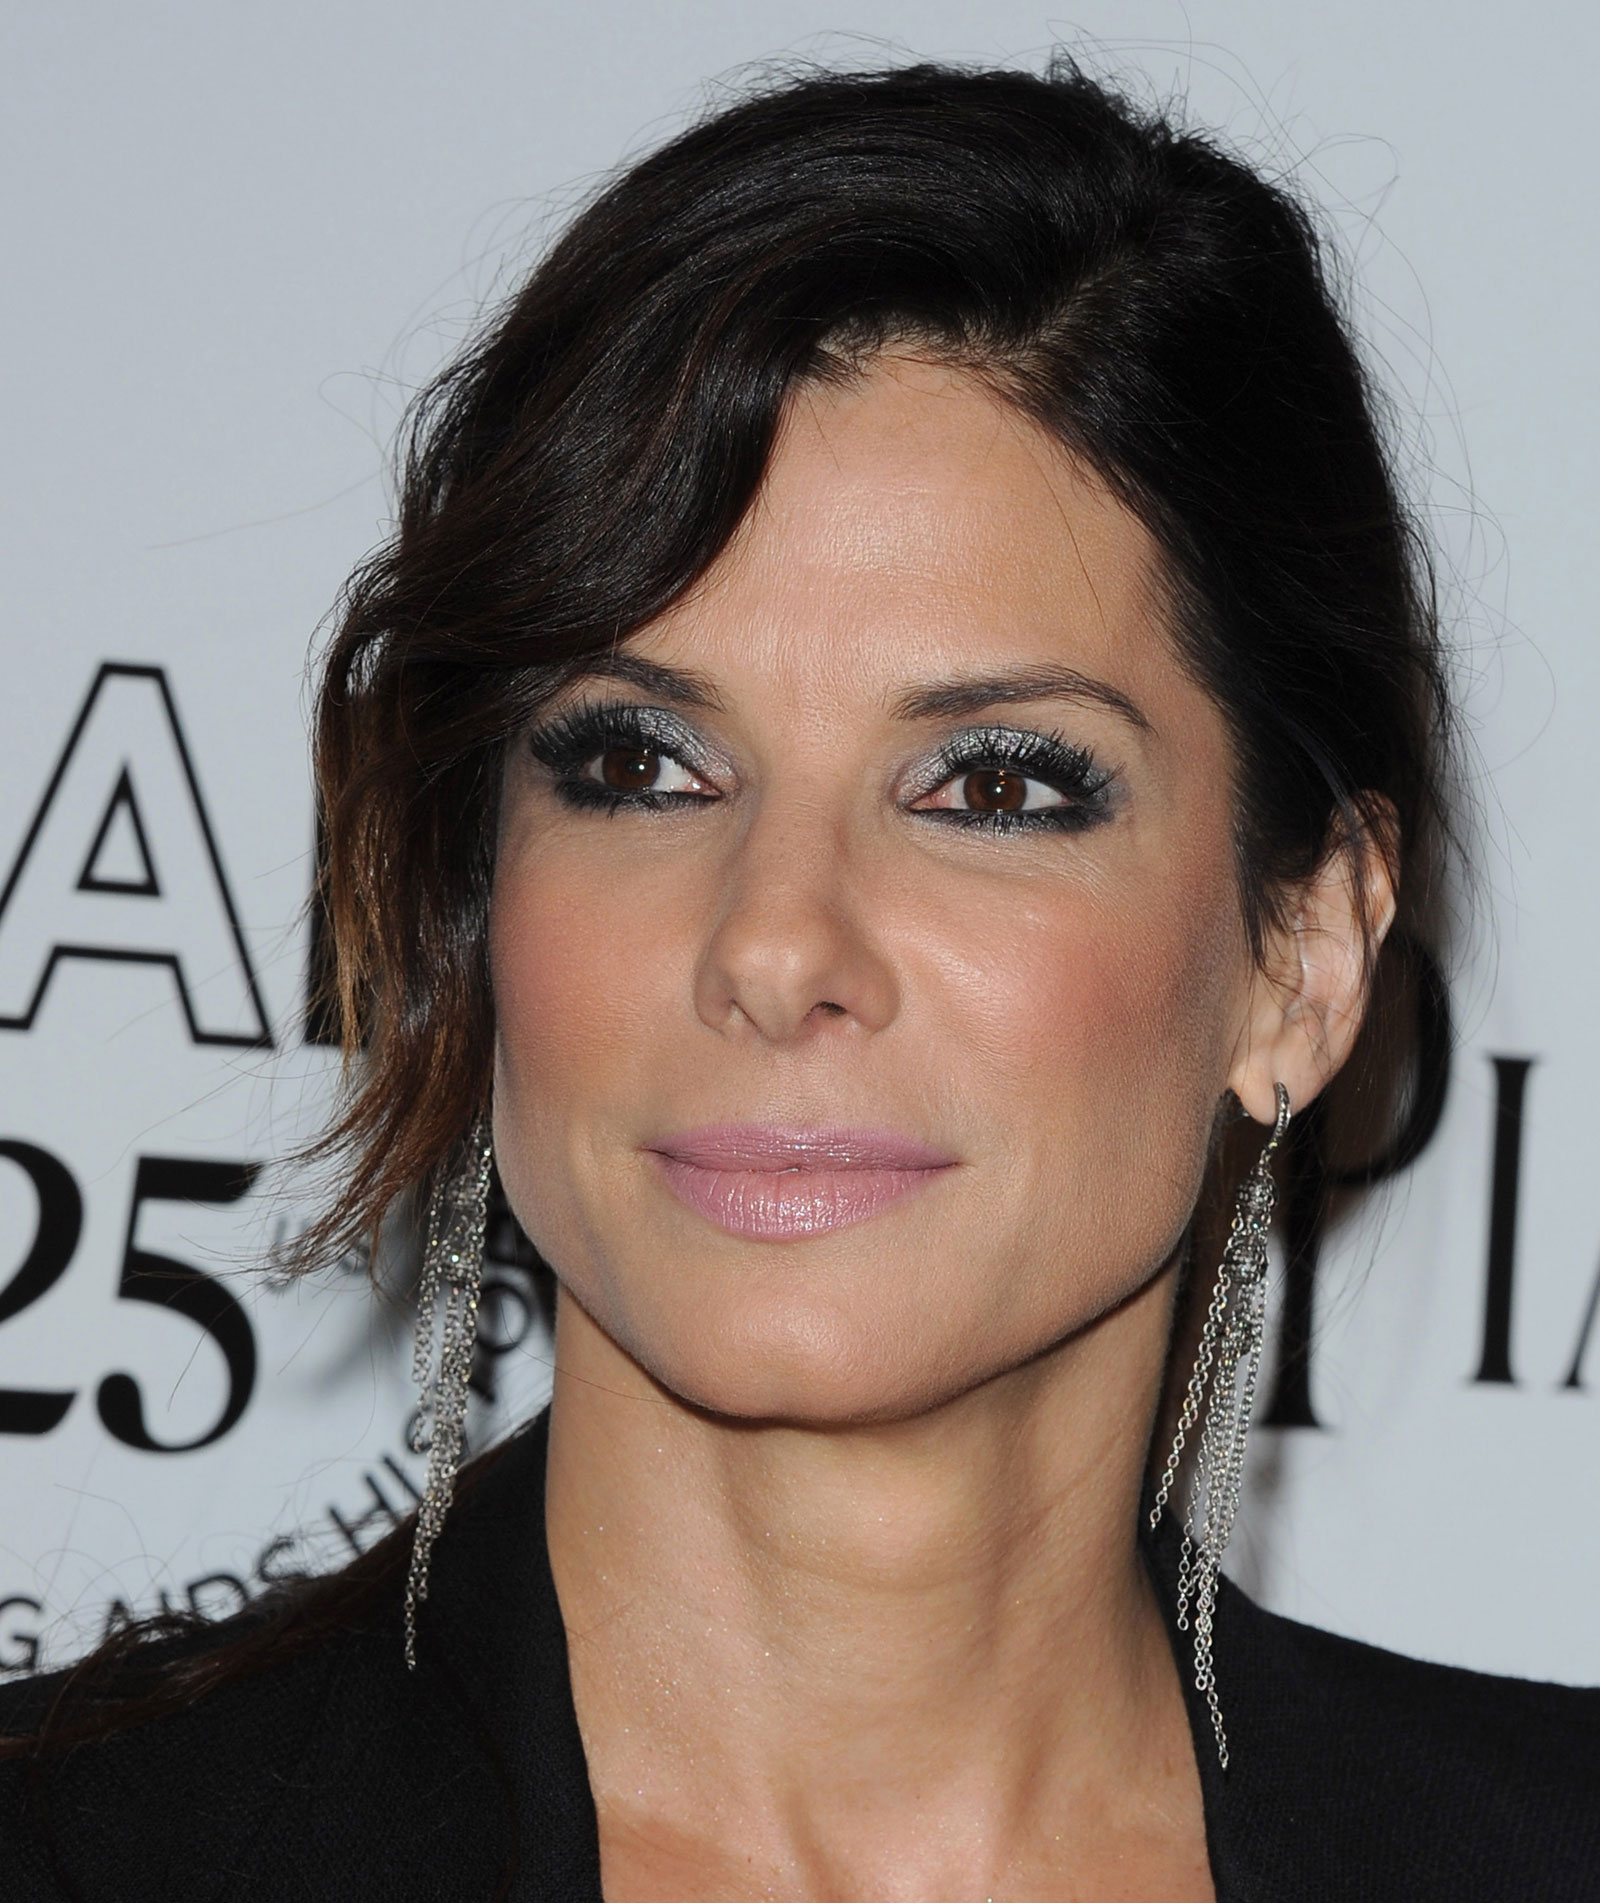 Sandra Bullock at amfAR The Foundation for Aids Research Inspiration ...